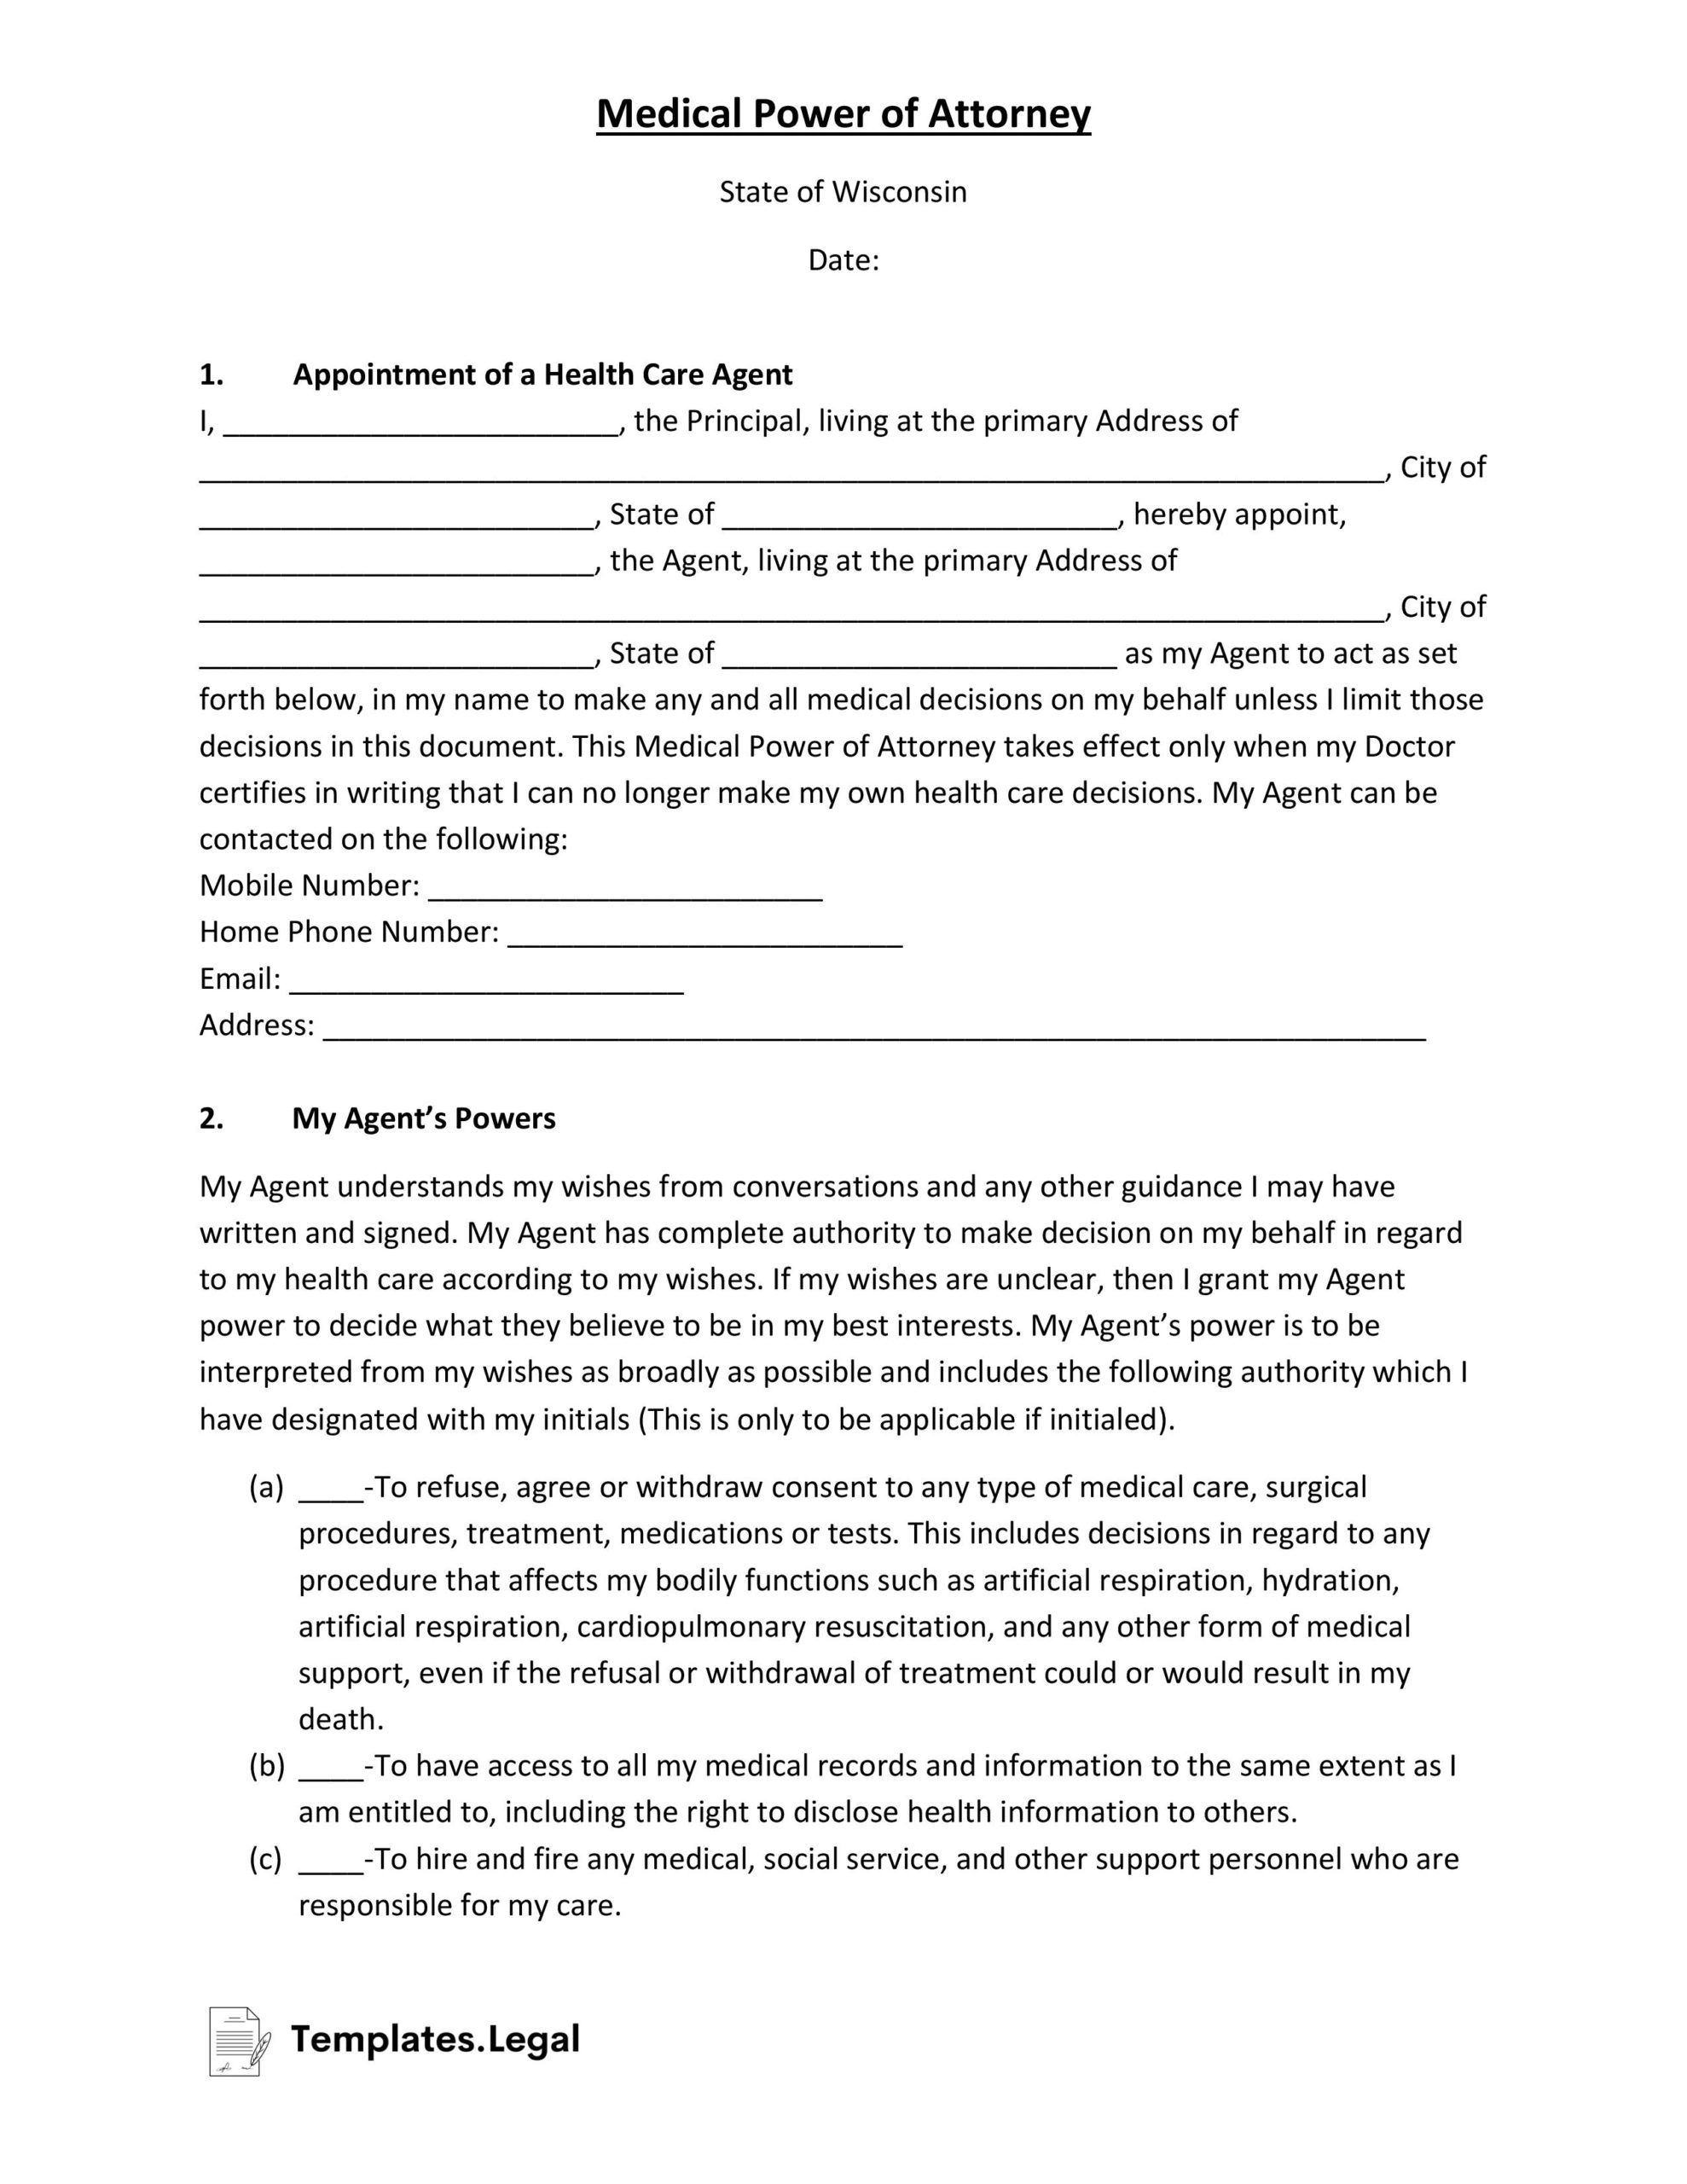 Wisconsin Medical Power of Attorney- Templates.Legal